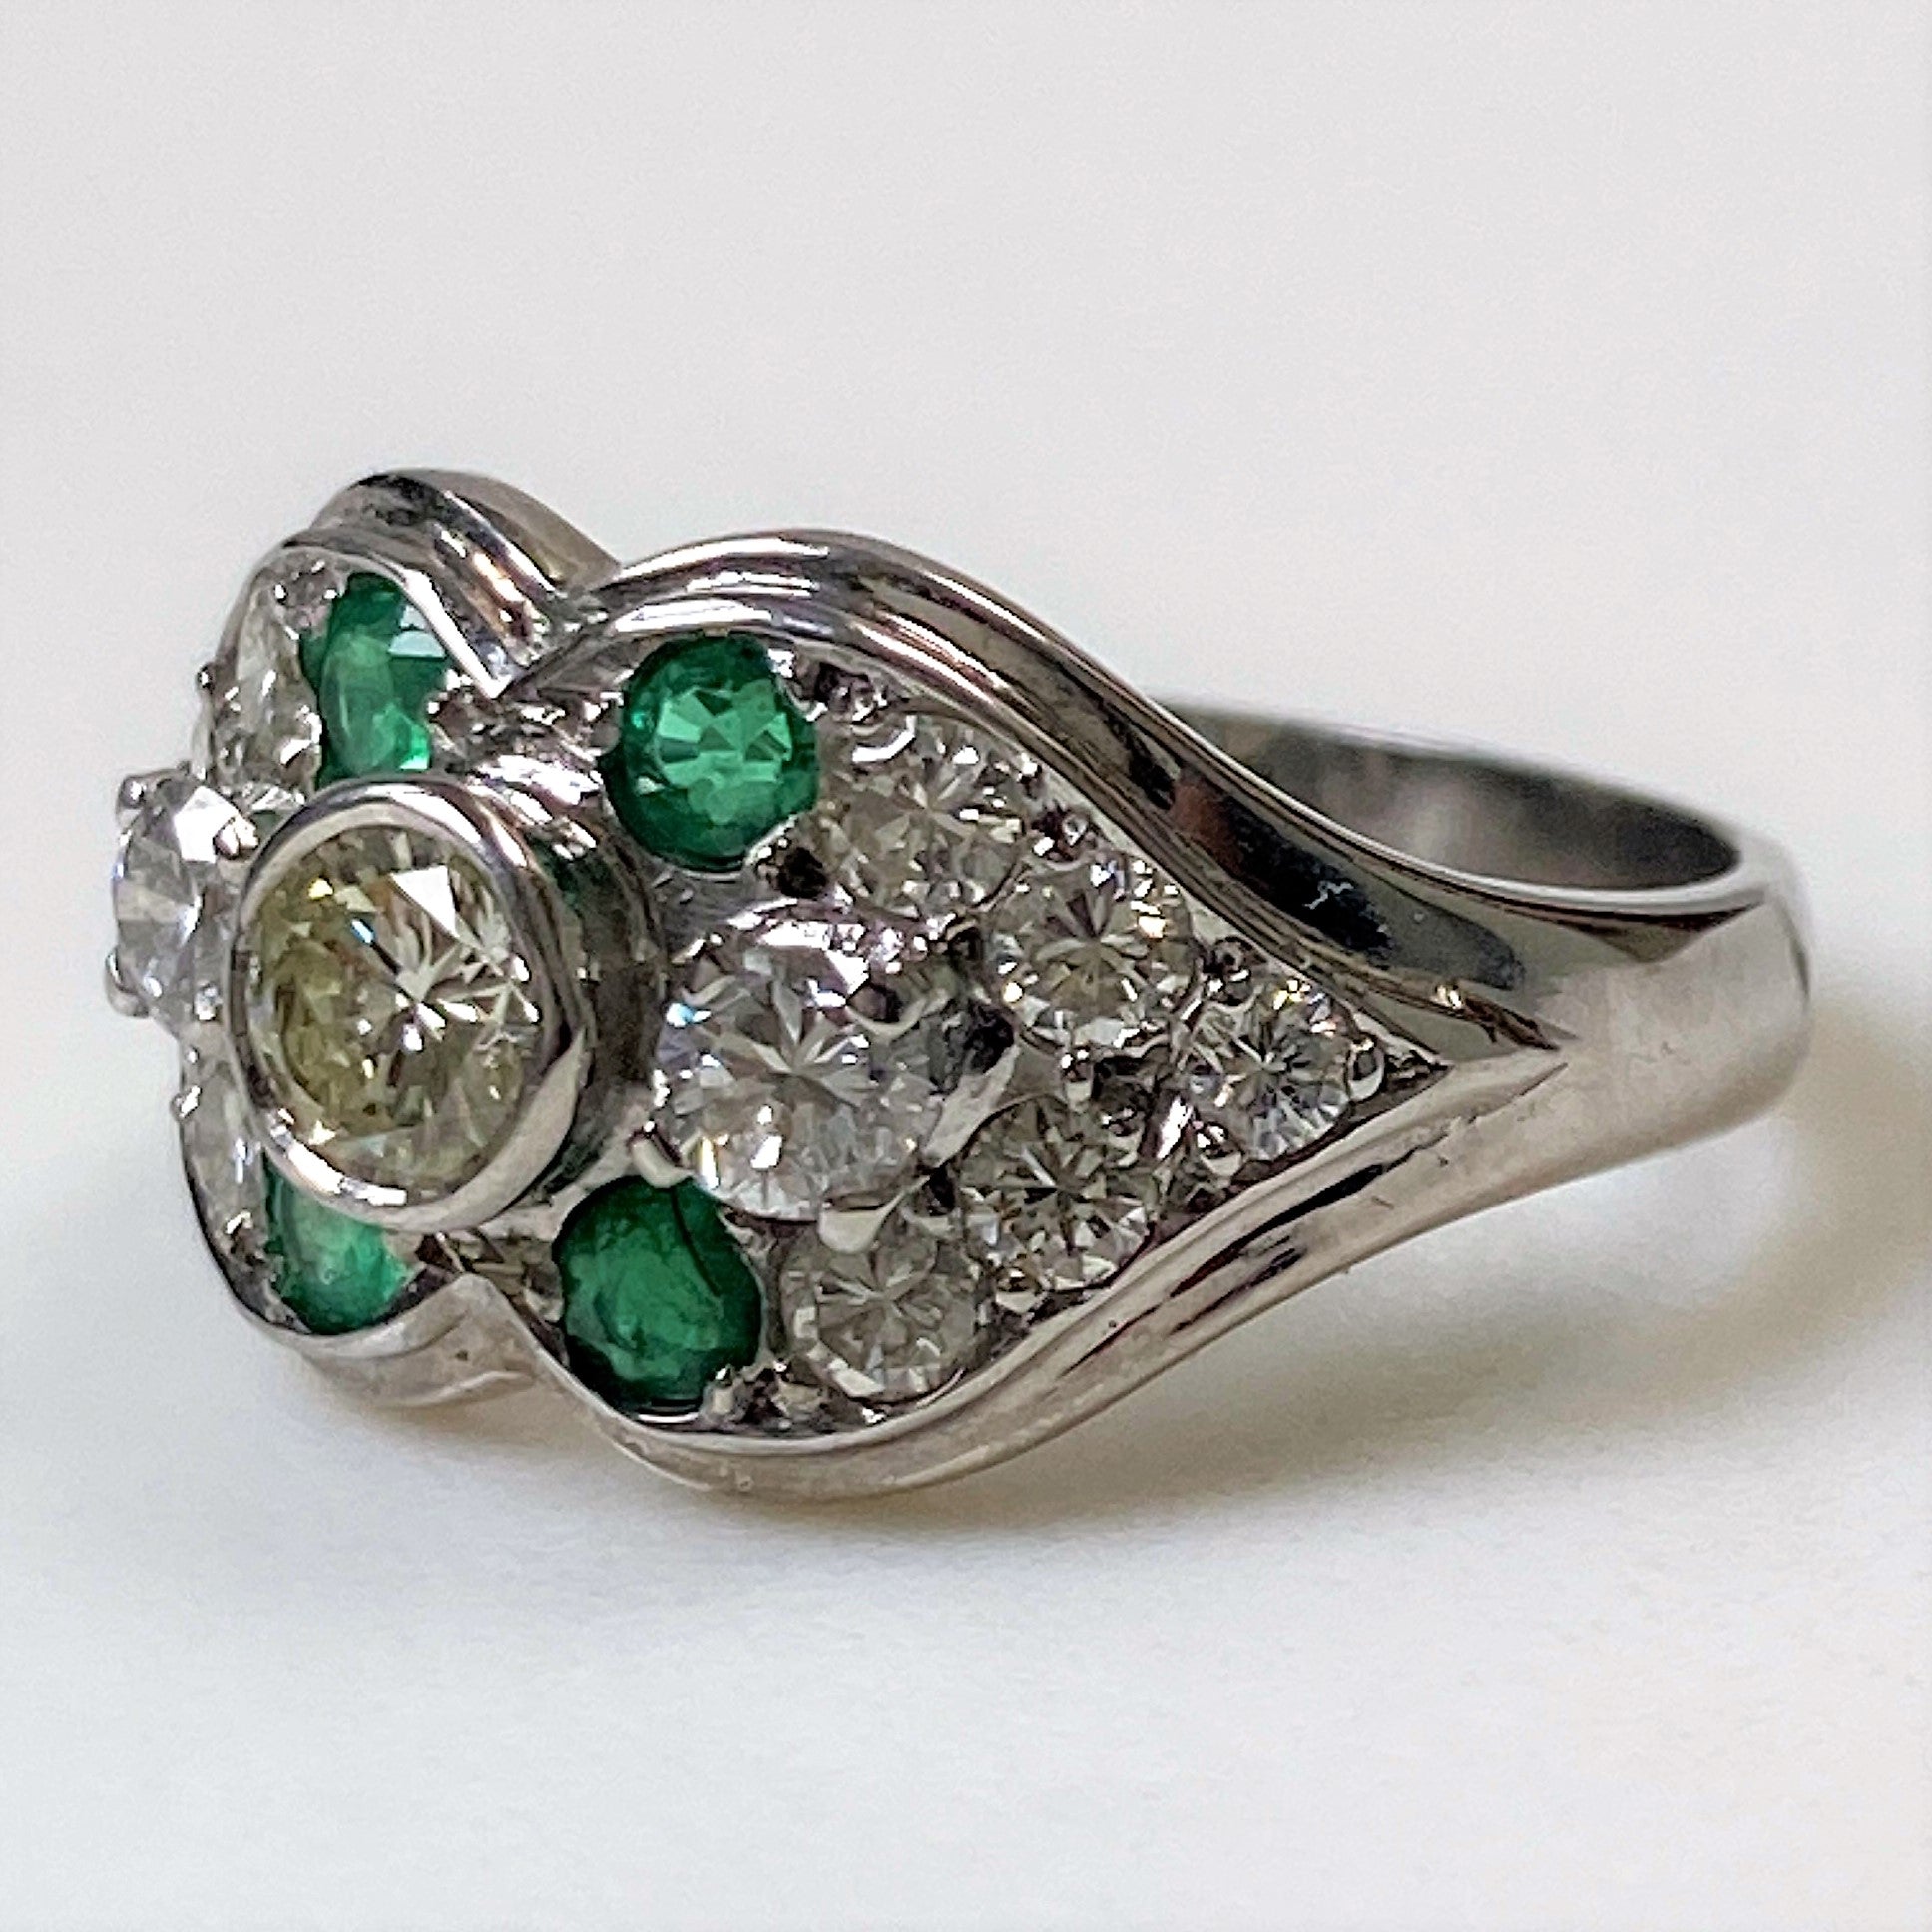 18ct White Gold, Emerald and Diamond Ring